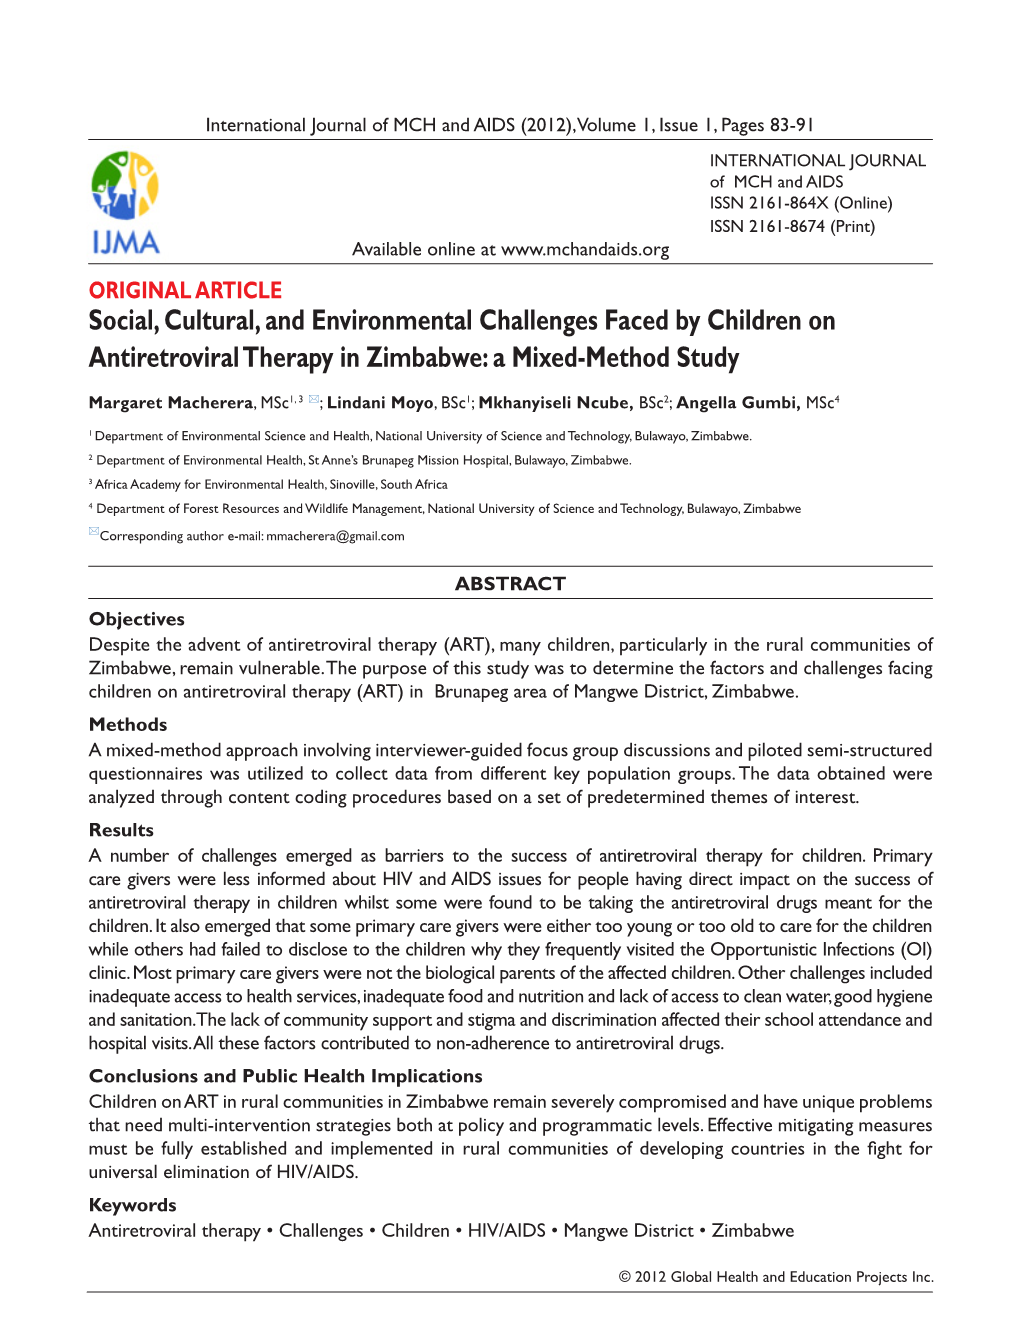 Social, Cultural, and Environmental Challenges Faced by Children on Antiretroviral Therapy in Zimbabwe: a Mixed-Method Study